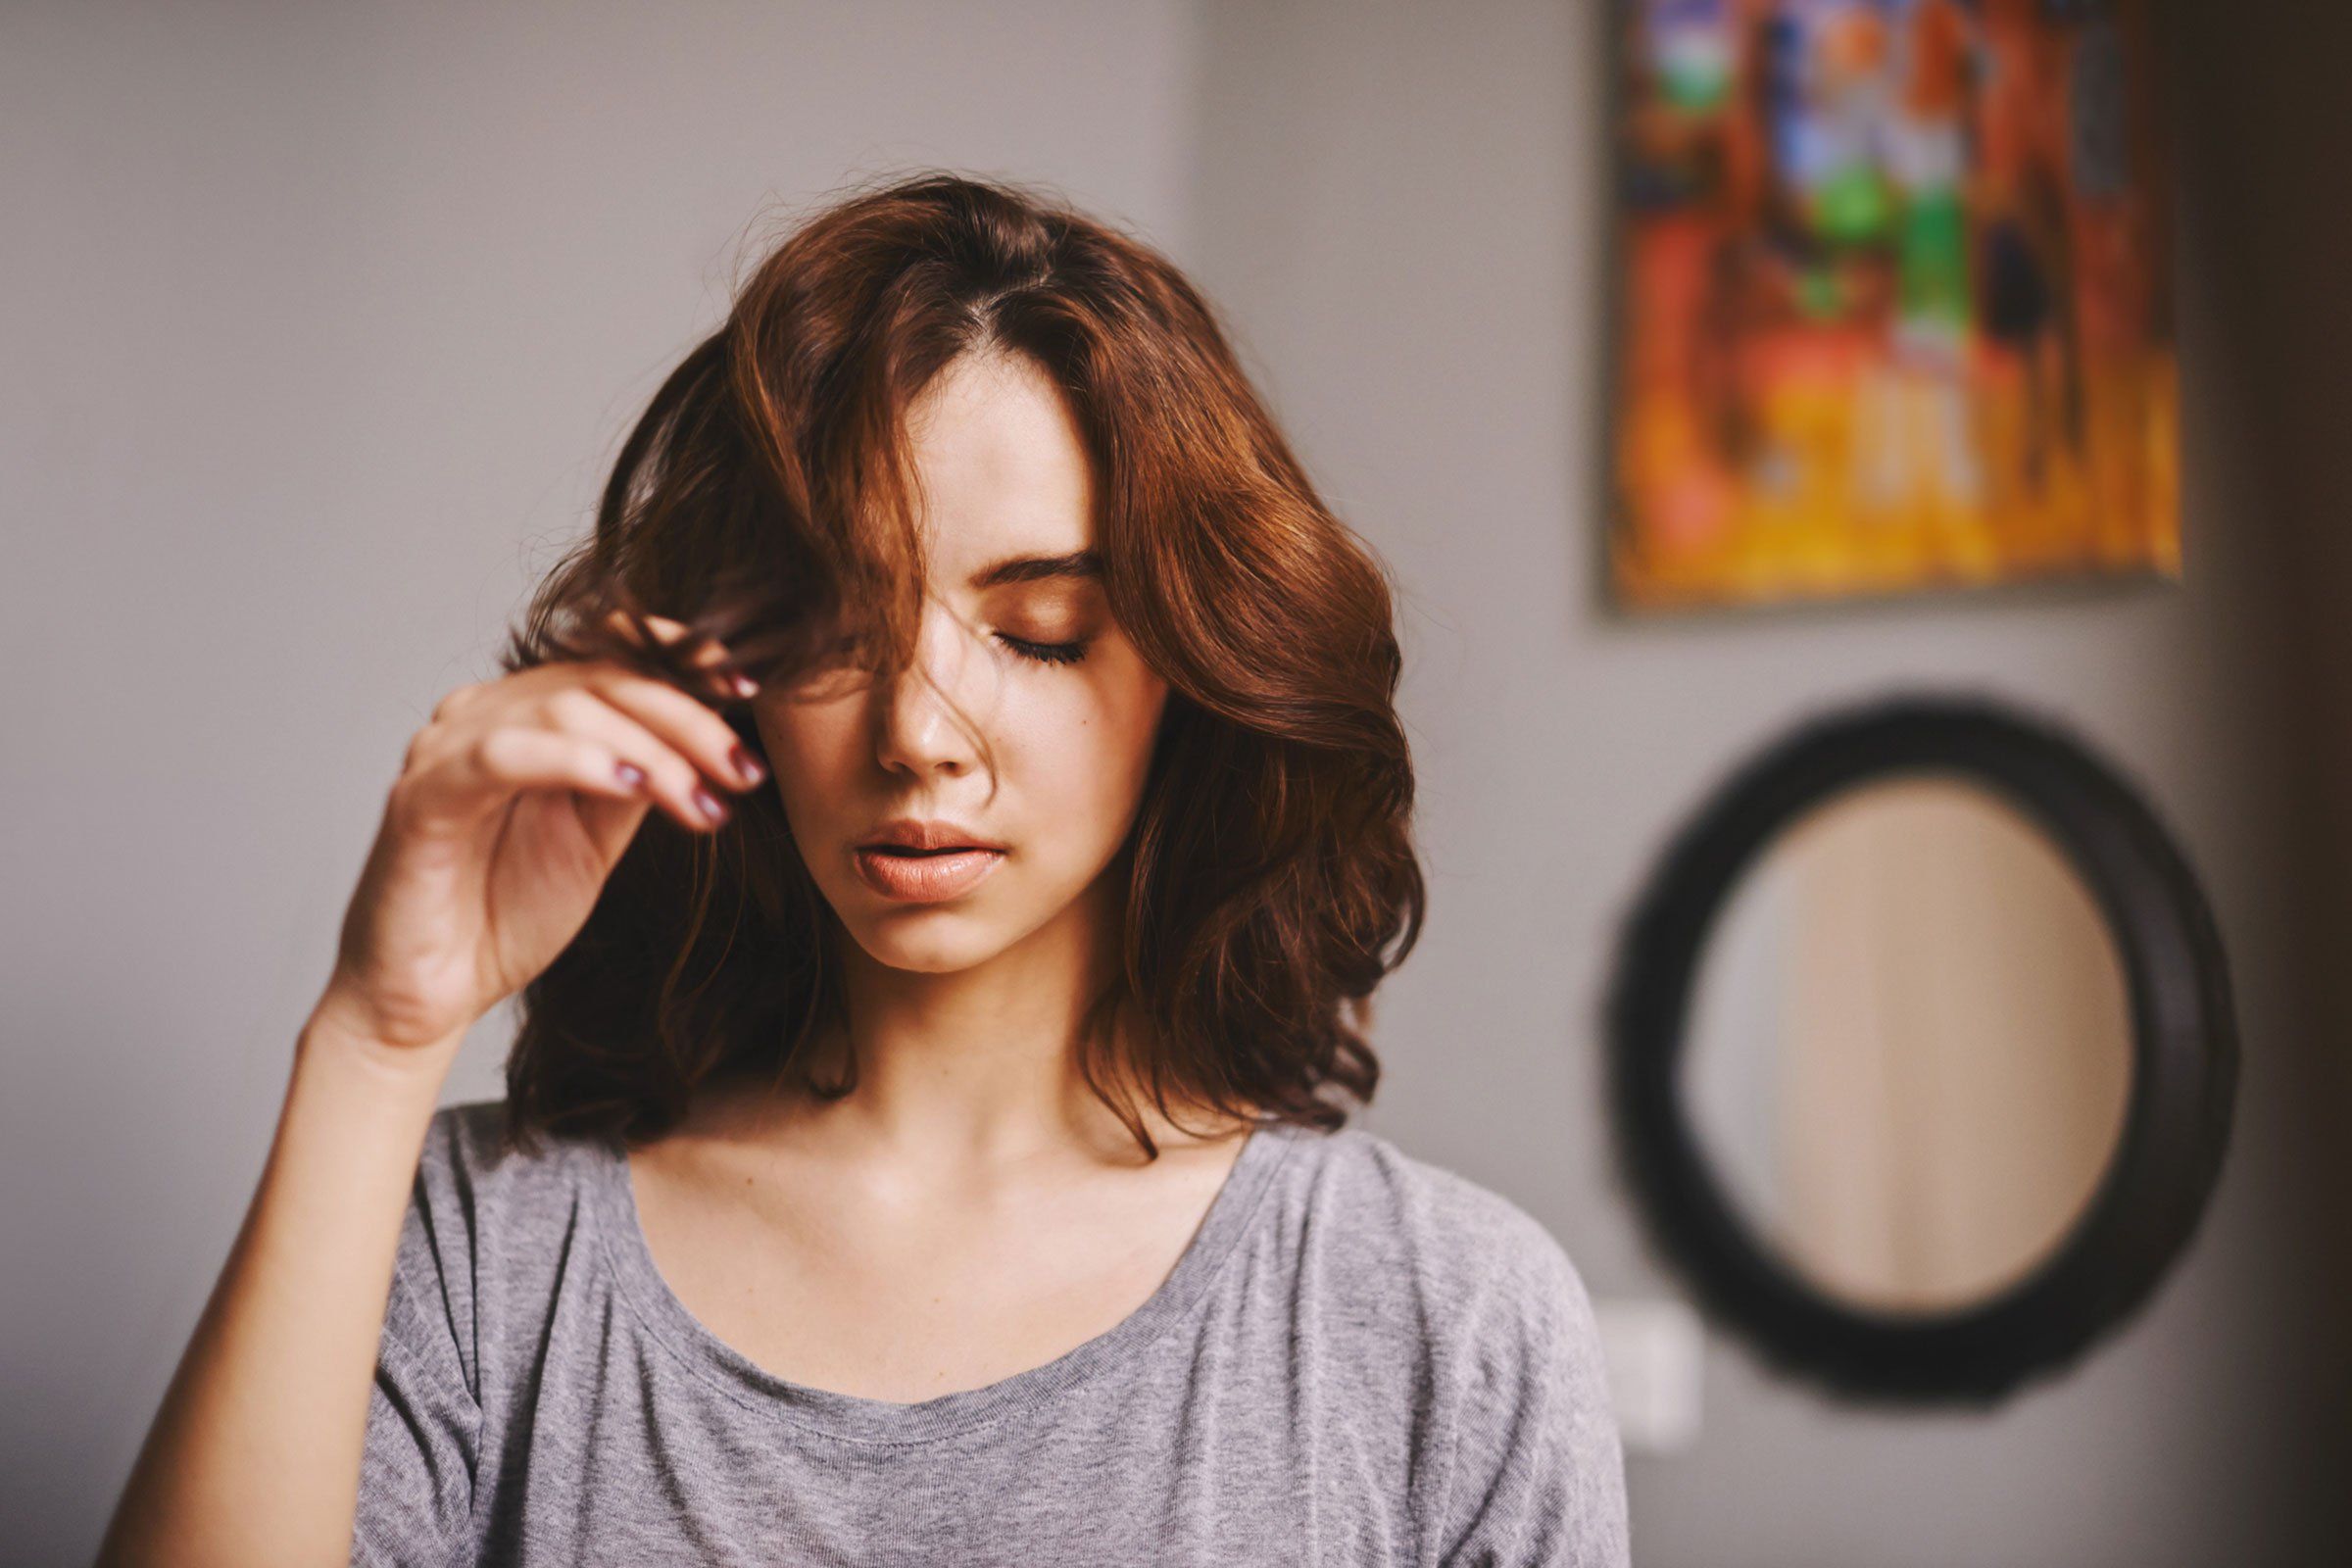 Here's What Happens When You Cut Your Hair Short | Reader's Digest For Blow Dry Short Curly Hair (View 18 of 25)